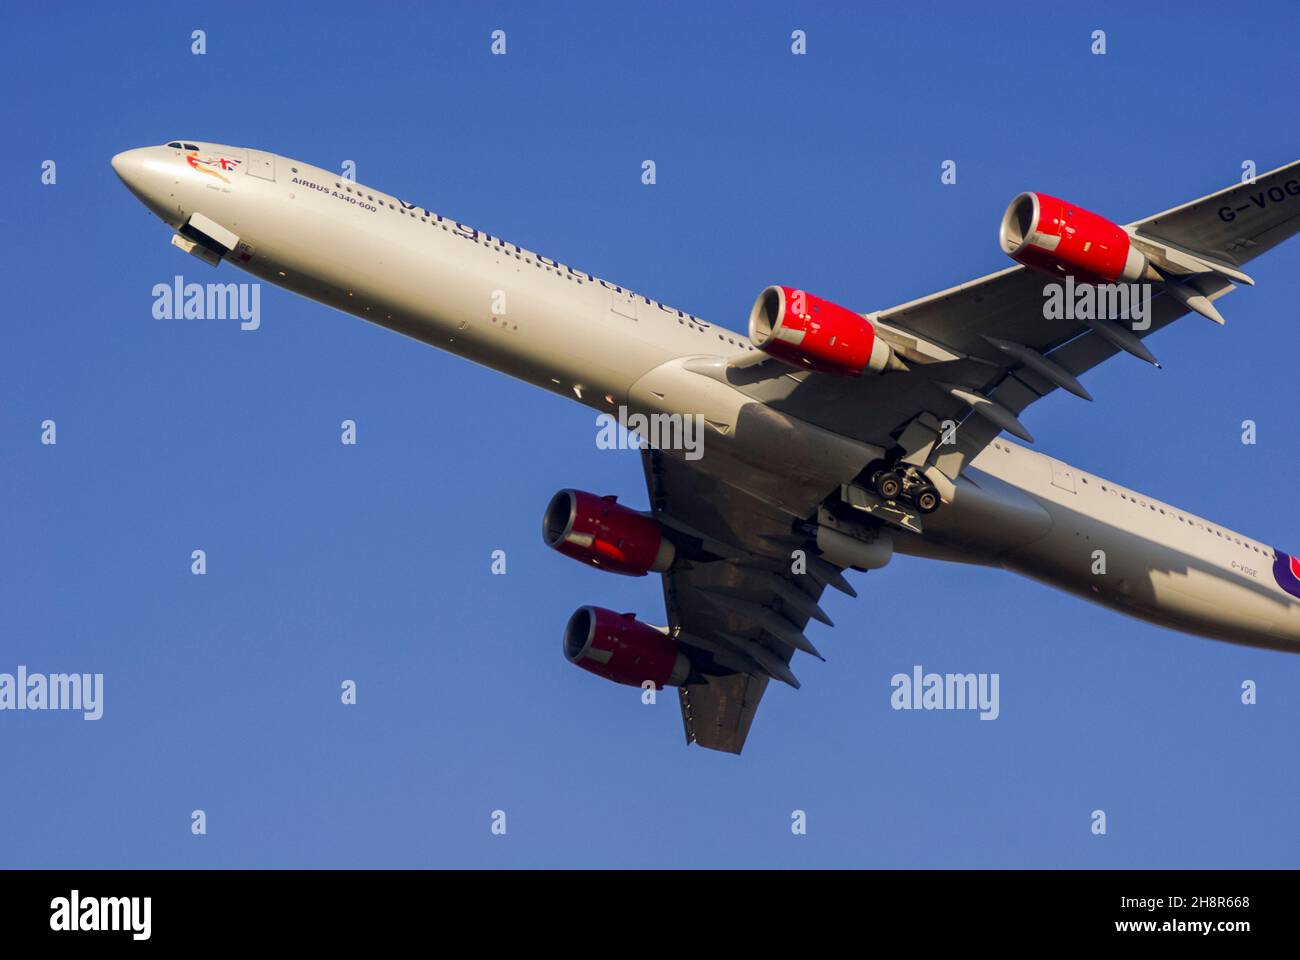 Virgin Atlantic Airways Airbus A340 jet airliner plane G-VOGE taking off from London Heathrow Airport, UK. Named Cover Girl. Departing in blue sky Stock Photo